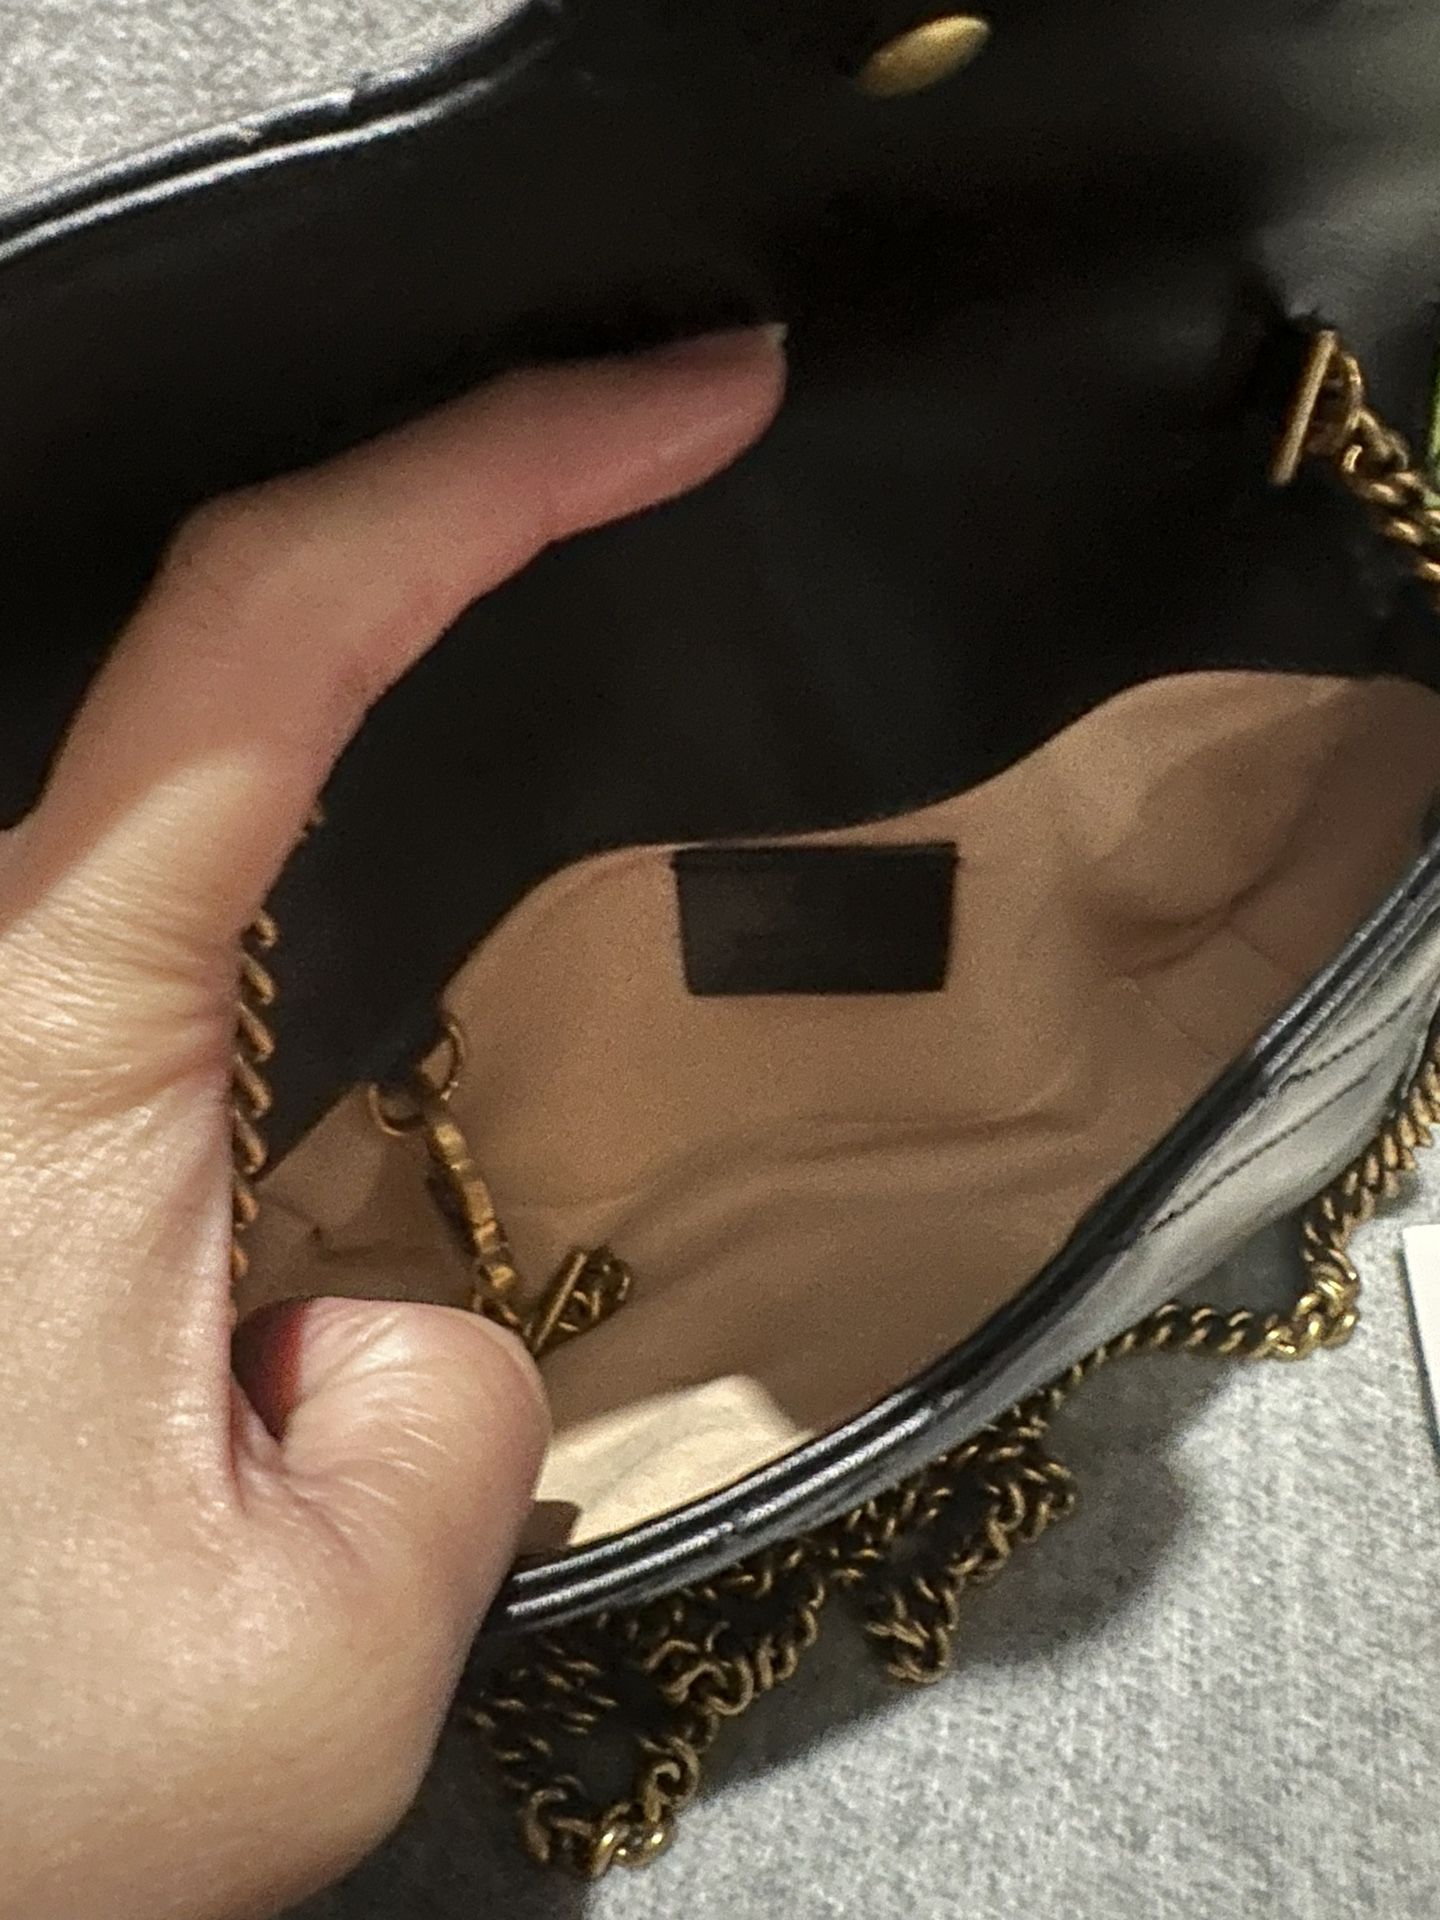 GUCCI - GG MARMONT LEATHER SUPER MINI BAG for Sale in San Diego, CA -  OfferUp